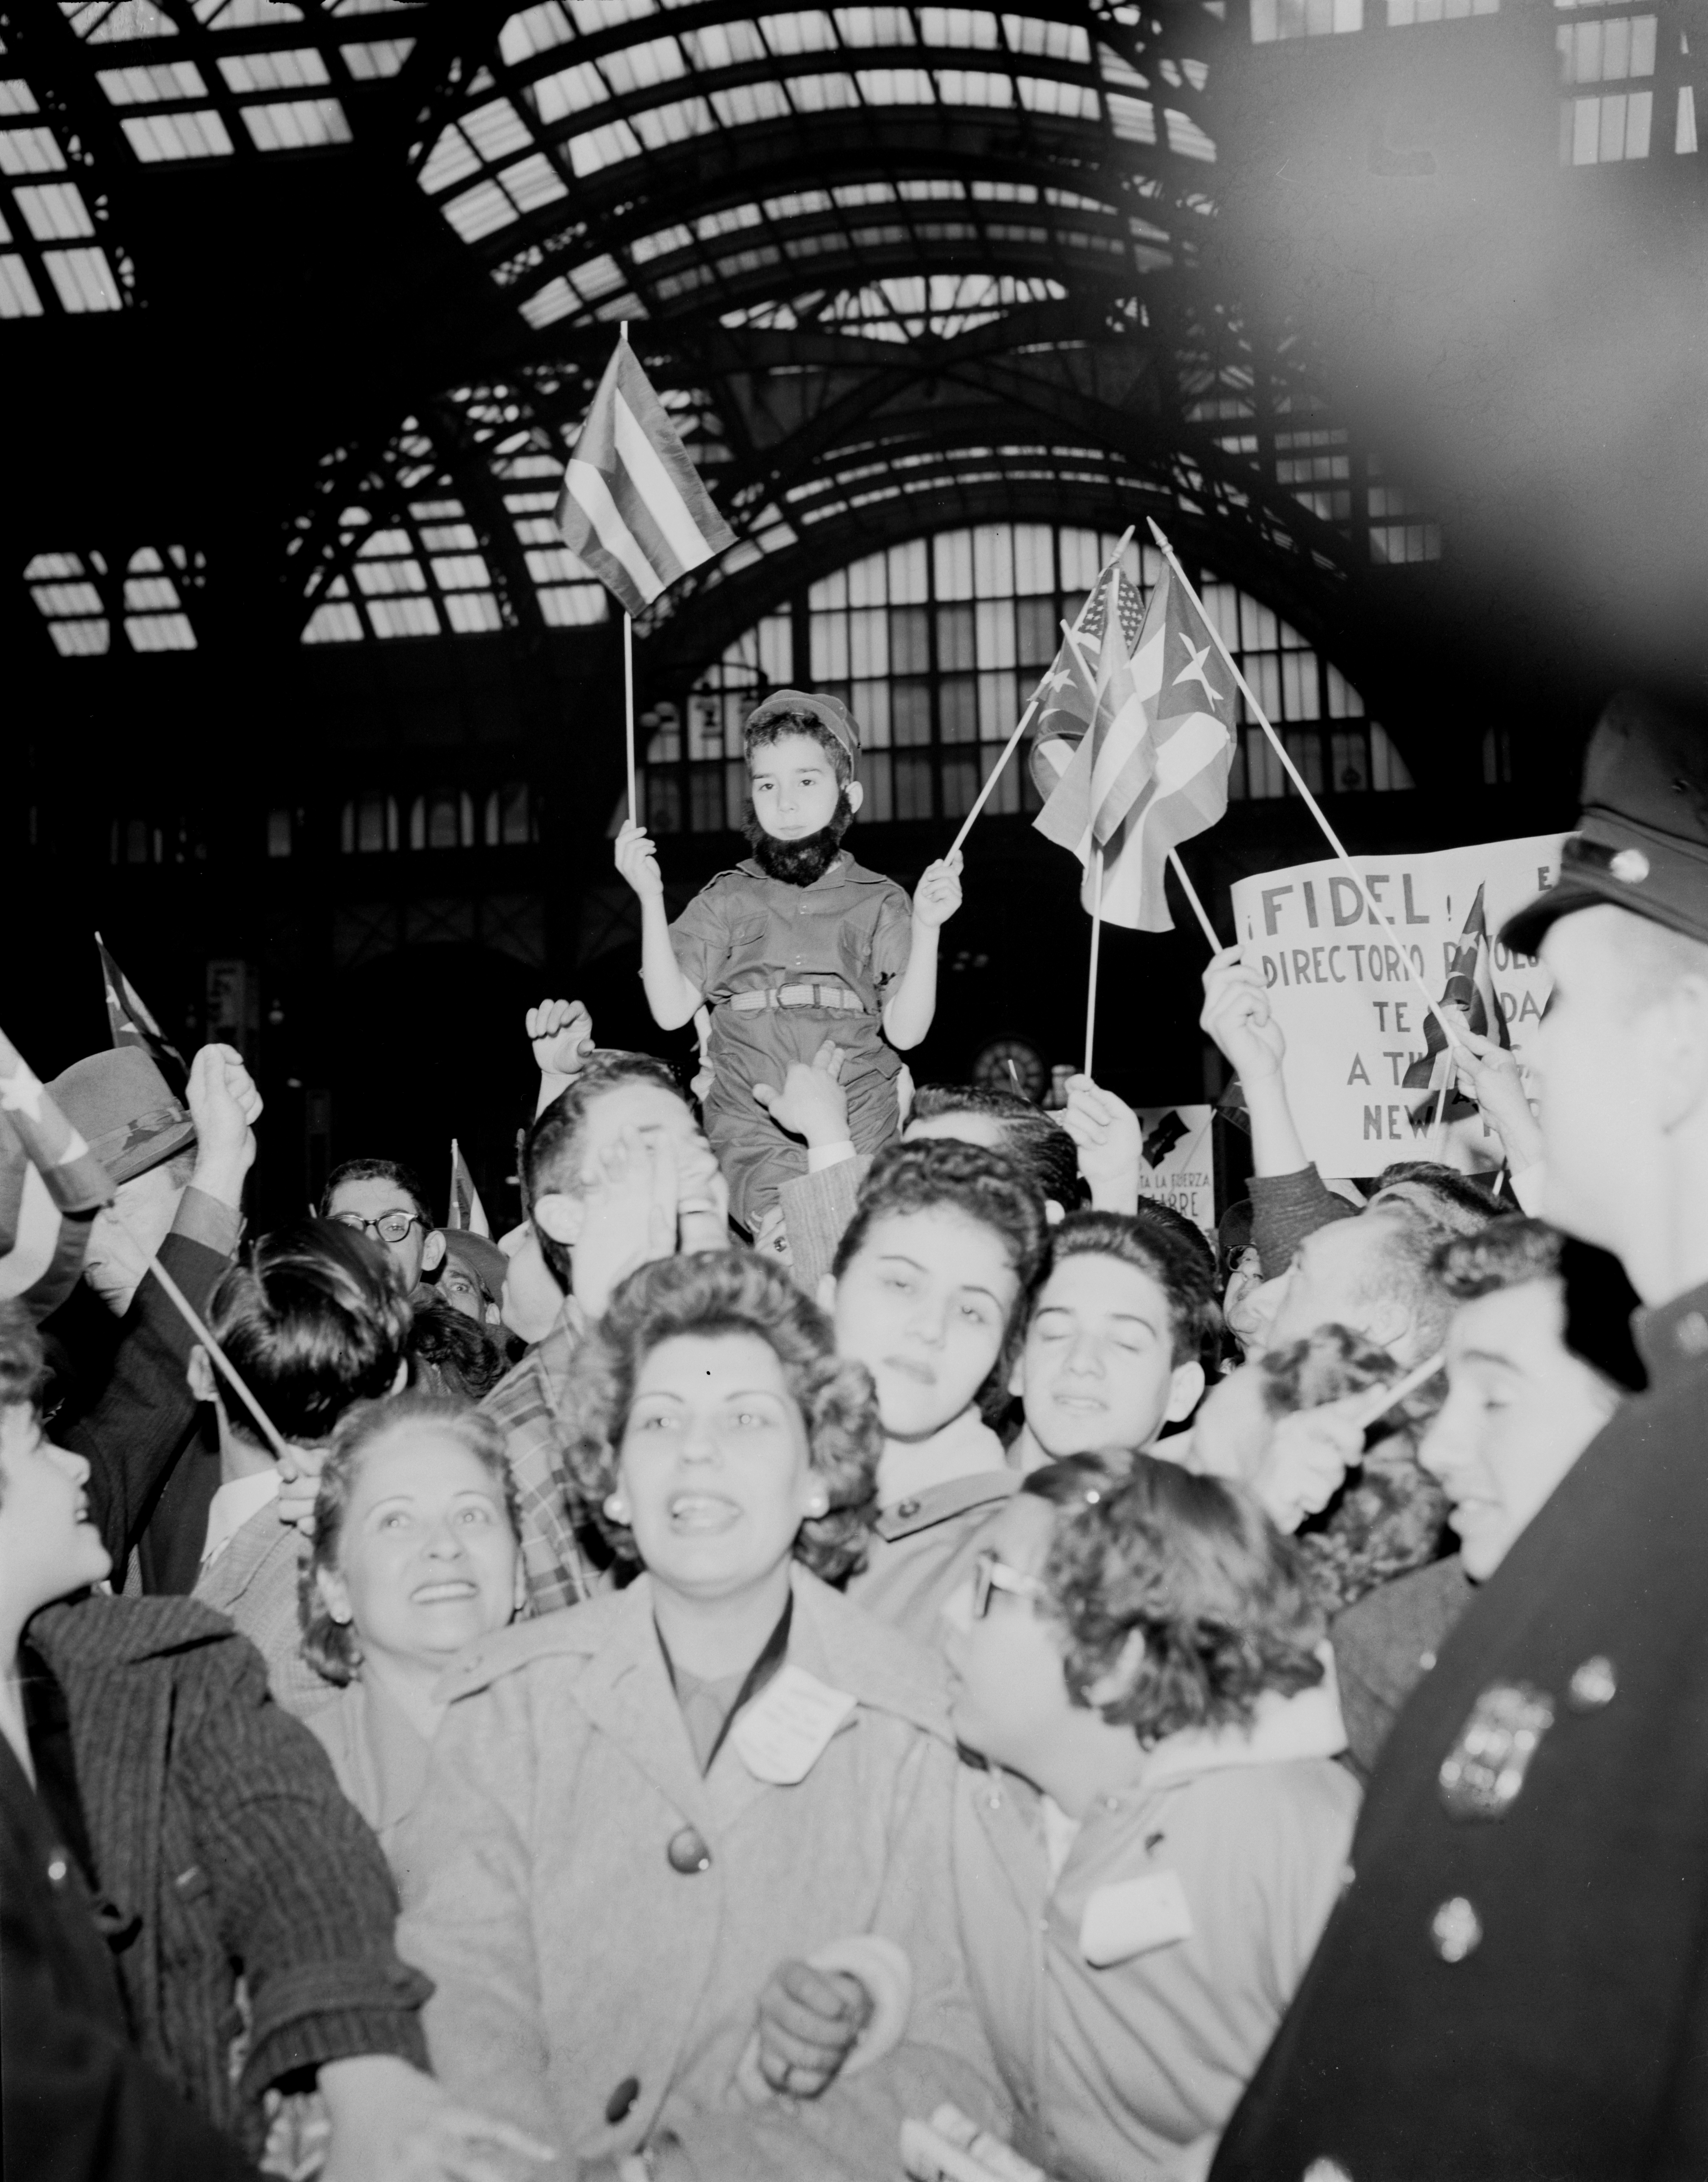 April 21, 1959 - New York City, NY - This child, with a false beard in the style of Fidel Castro, is carried on the shoulders of sympathizers of the revolutionary leader, as they await his arrival at Penn Station.